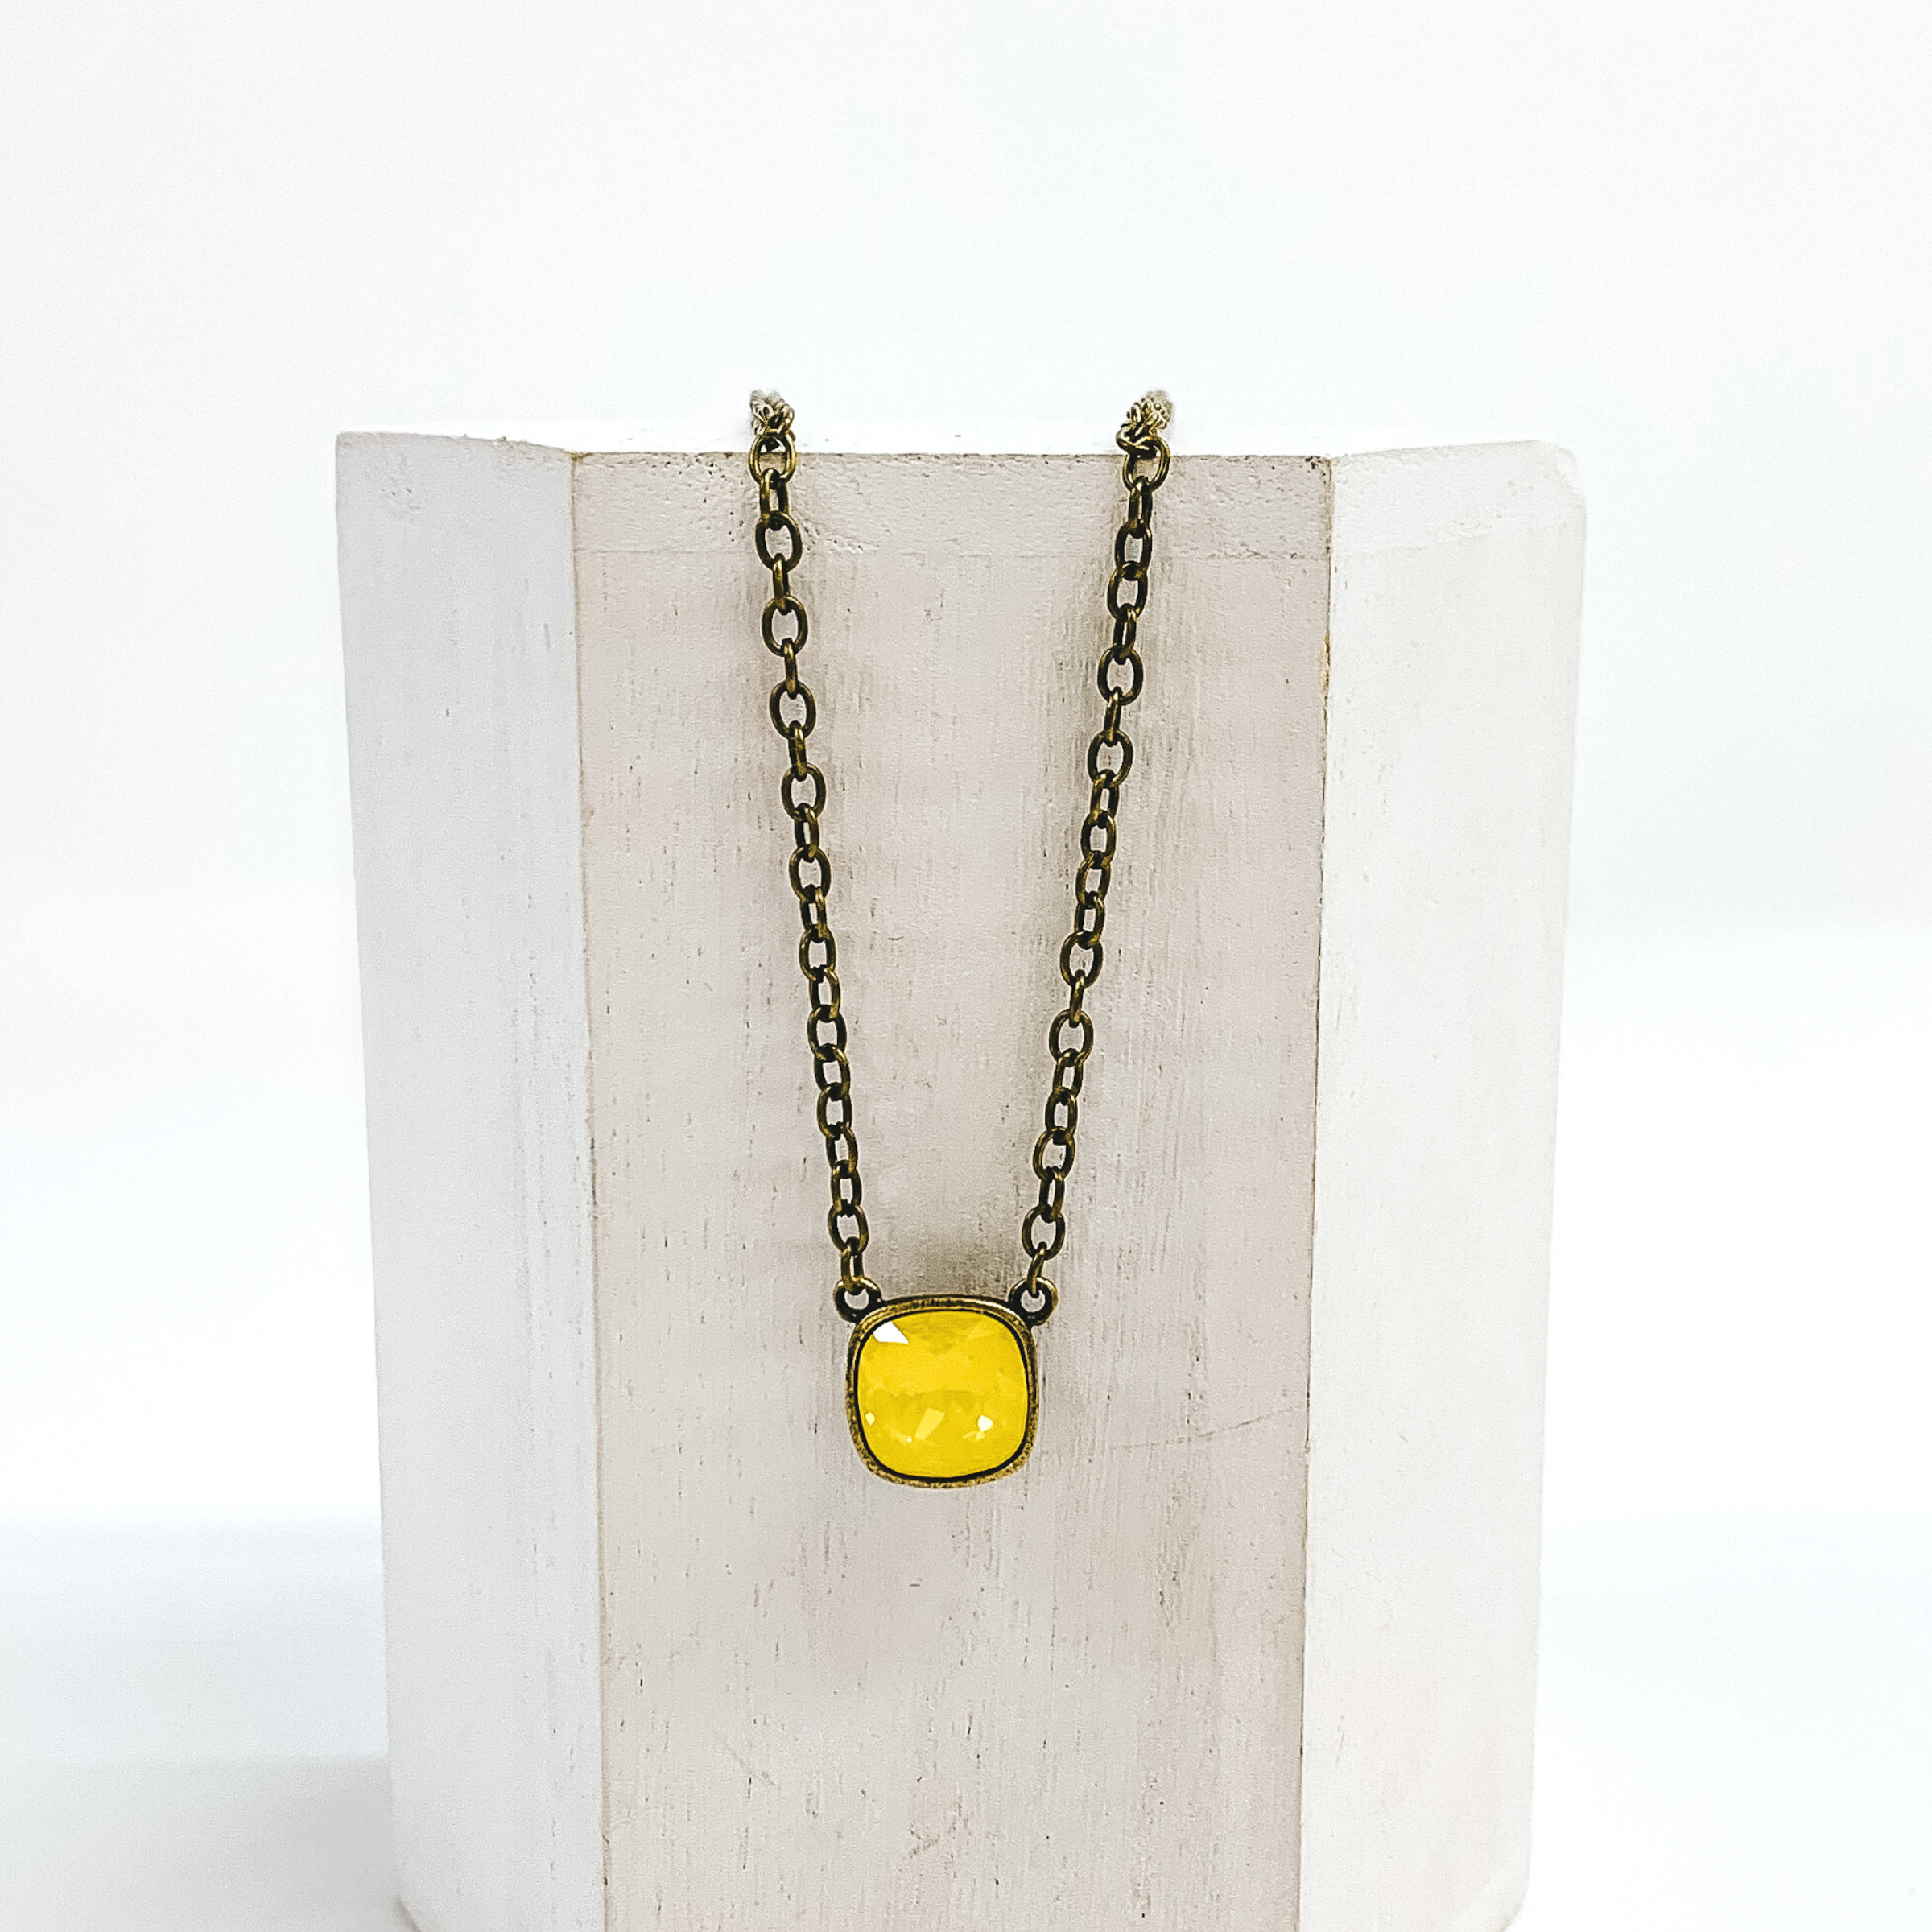 Bronze chained necklace with a square pendant with a yellow cushion cut crystal. This necklace is pictured laying on a white block on a white background. 